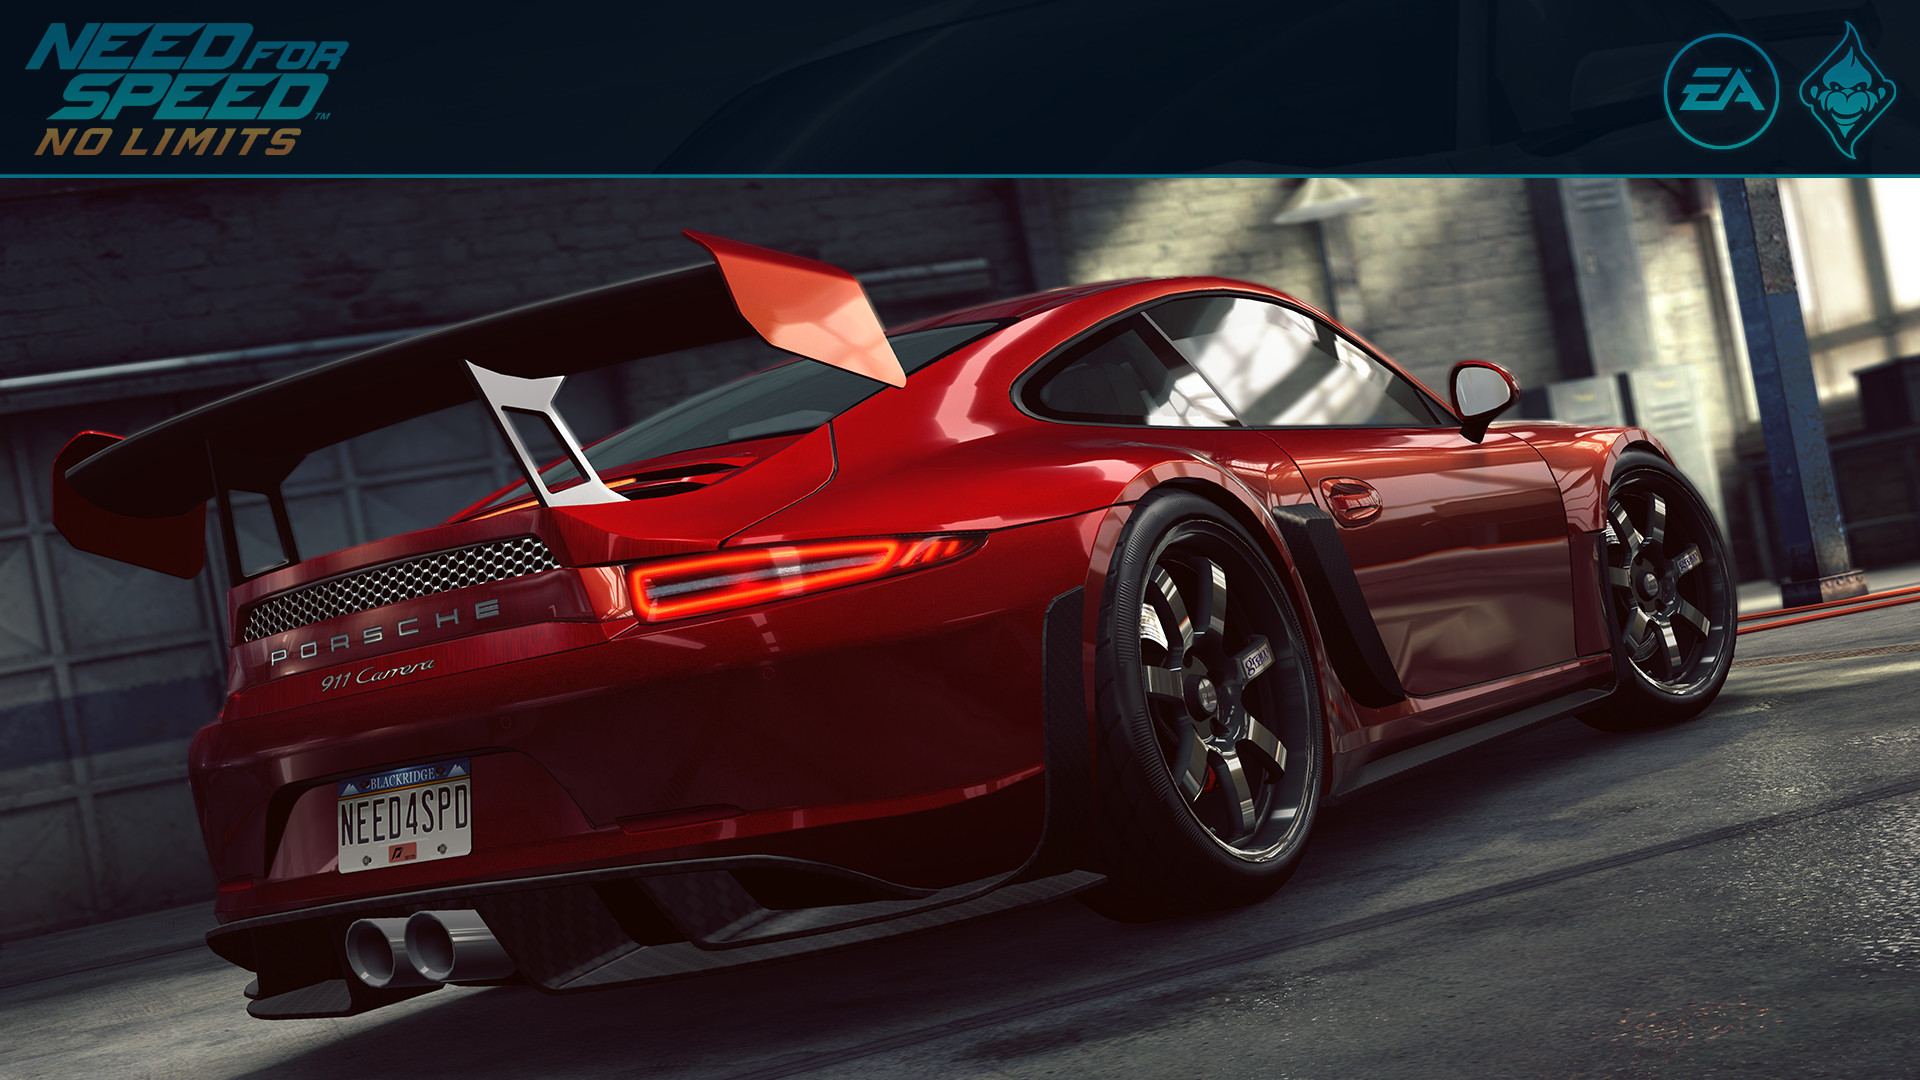 Need For Speed No Limits Video Games Car Vehicle Garages Porsche 911 Carrera S Tuning Need For Speed 1920x1080